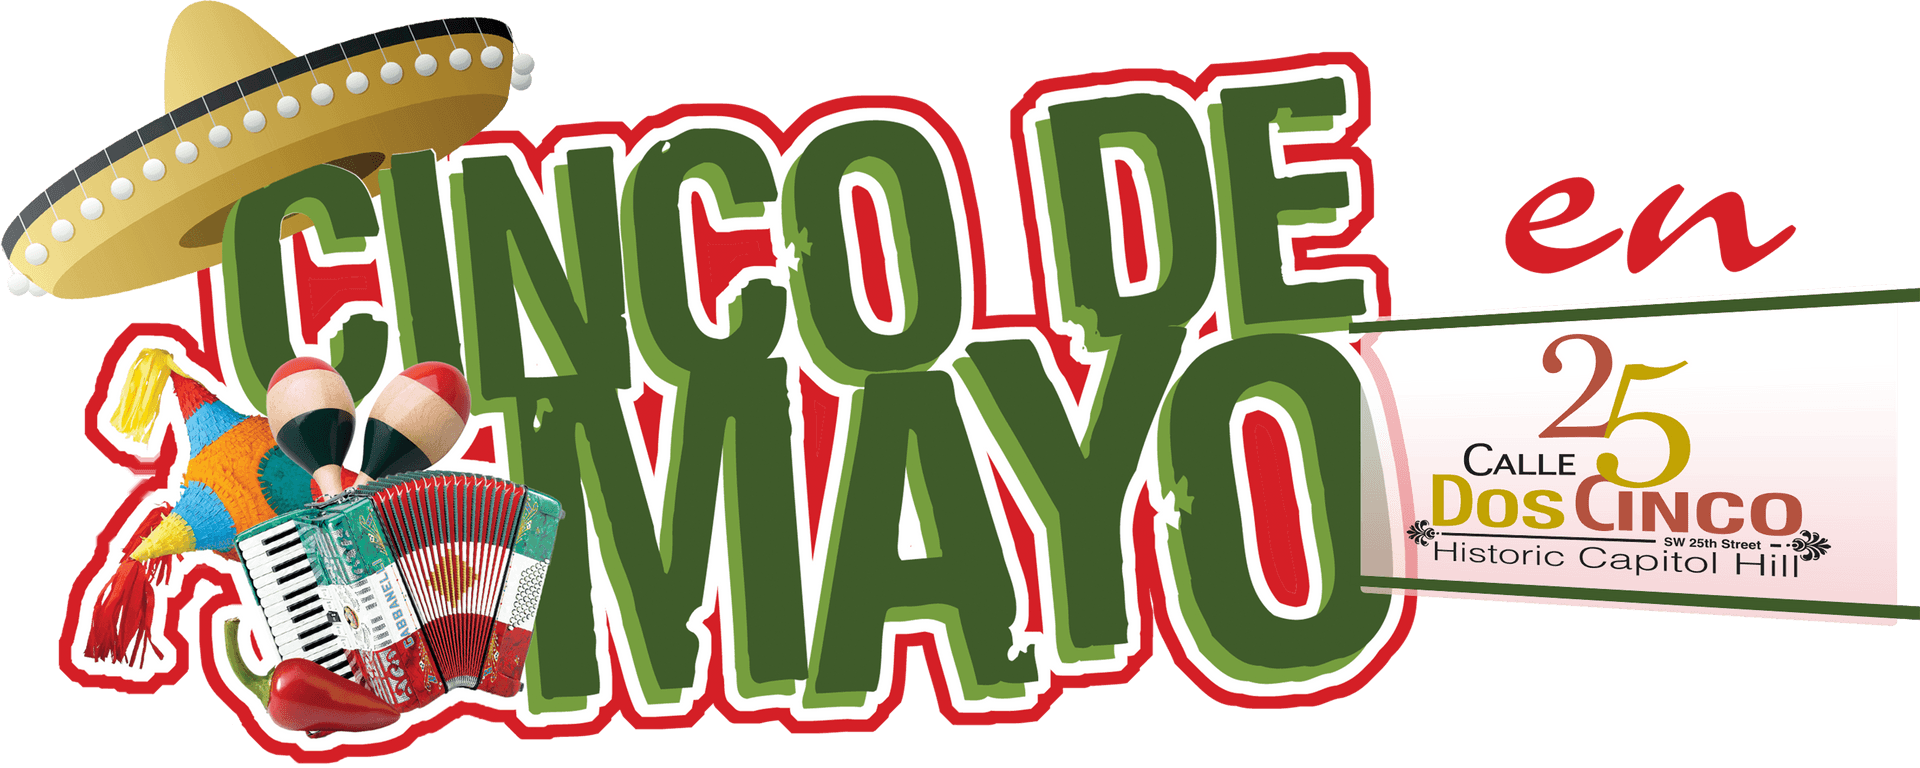 Cincode Mayo Festival Graphic PNG image